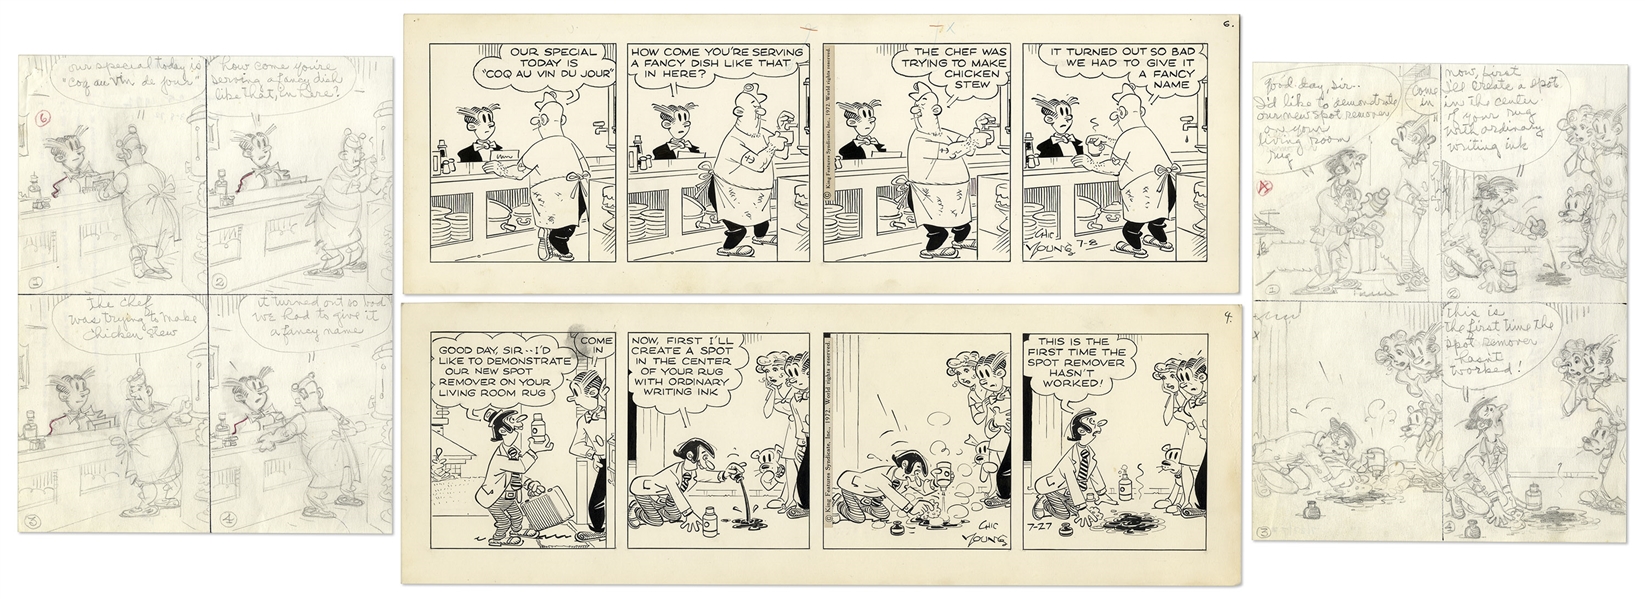 2 Chic Young Hand-Drawn ''Blondie'' Comic Strips From 1972 -- With Chic Young's Original Artwork for Both